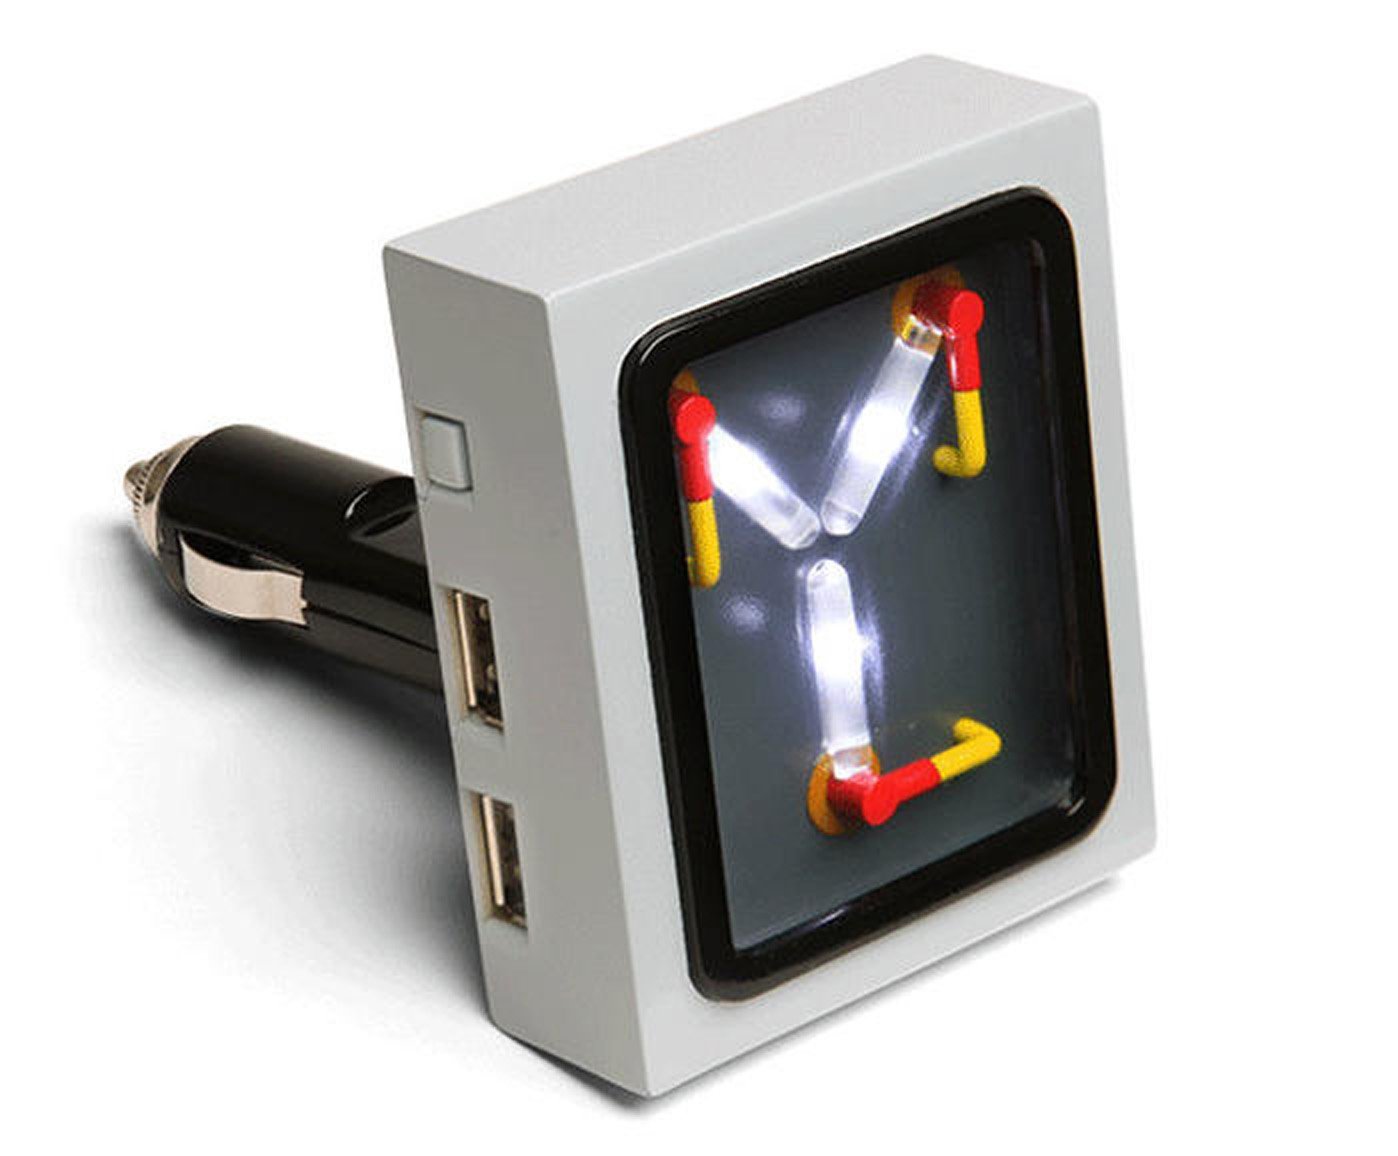 FLux Capacitor USB Car Charger